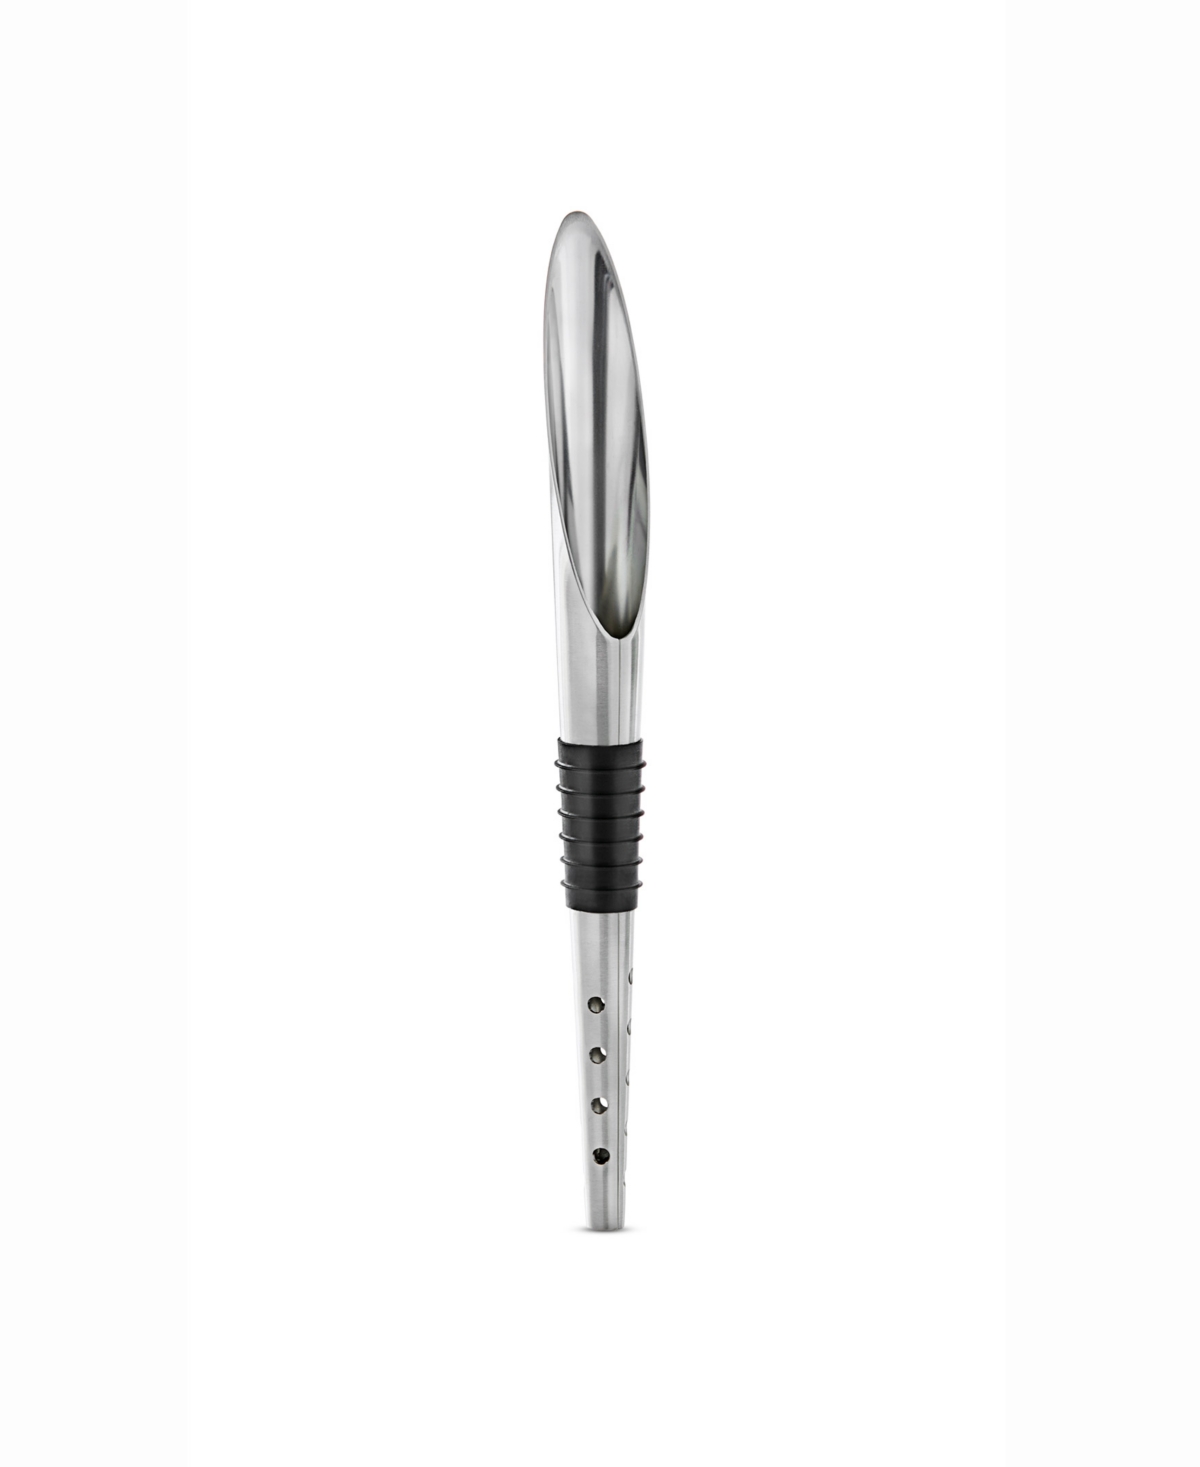 Rosendahl Grand Cru Stainless Steel Wine Stopper, Pourer And Decanter In Stainless Steel Black